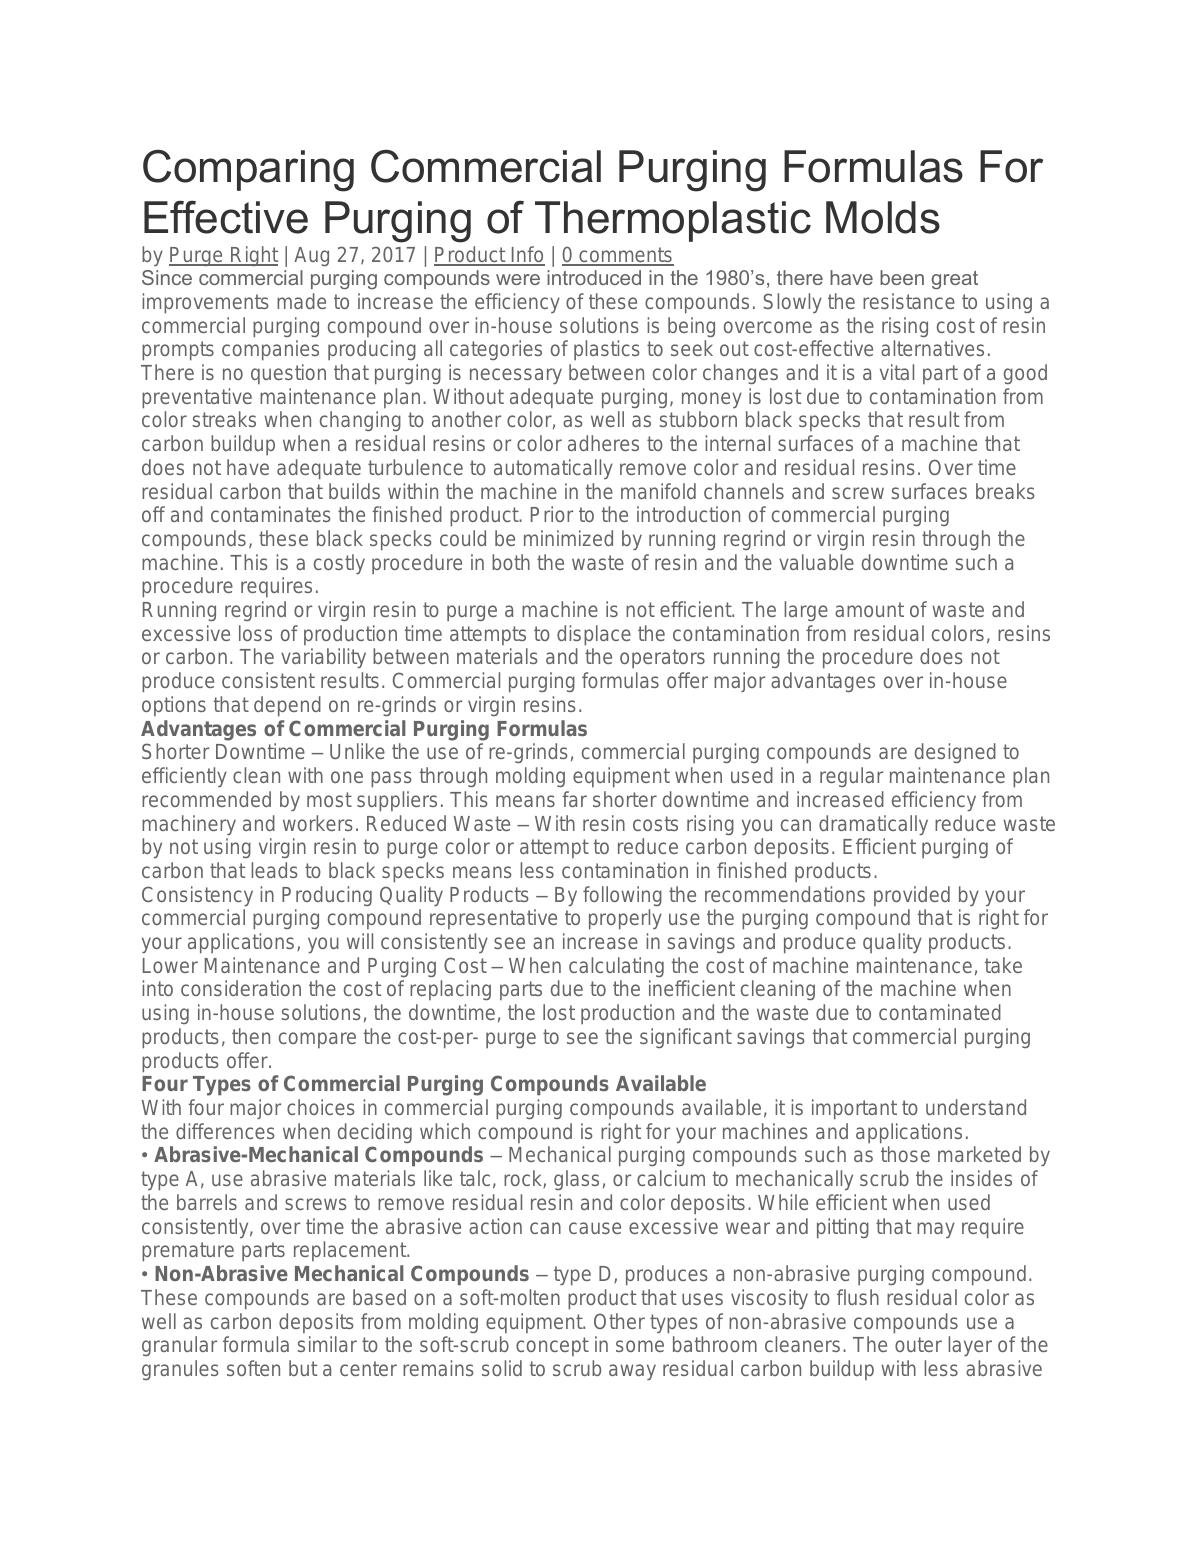 Comparing Commercial Purging Formulas For Effective Purging of Thermoplastic Molds